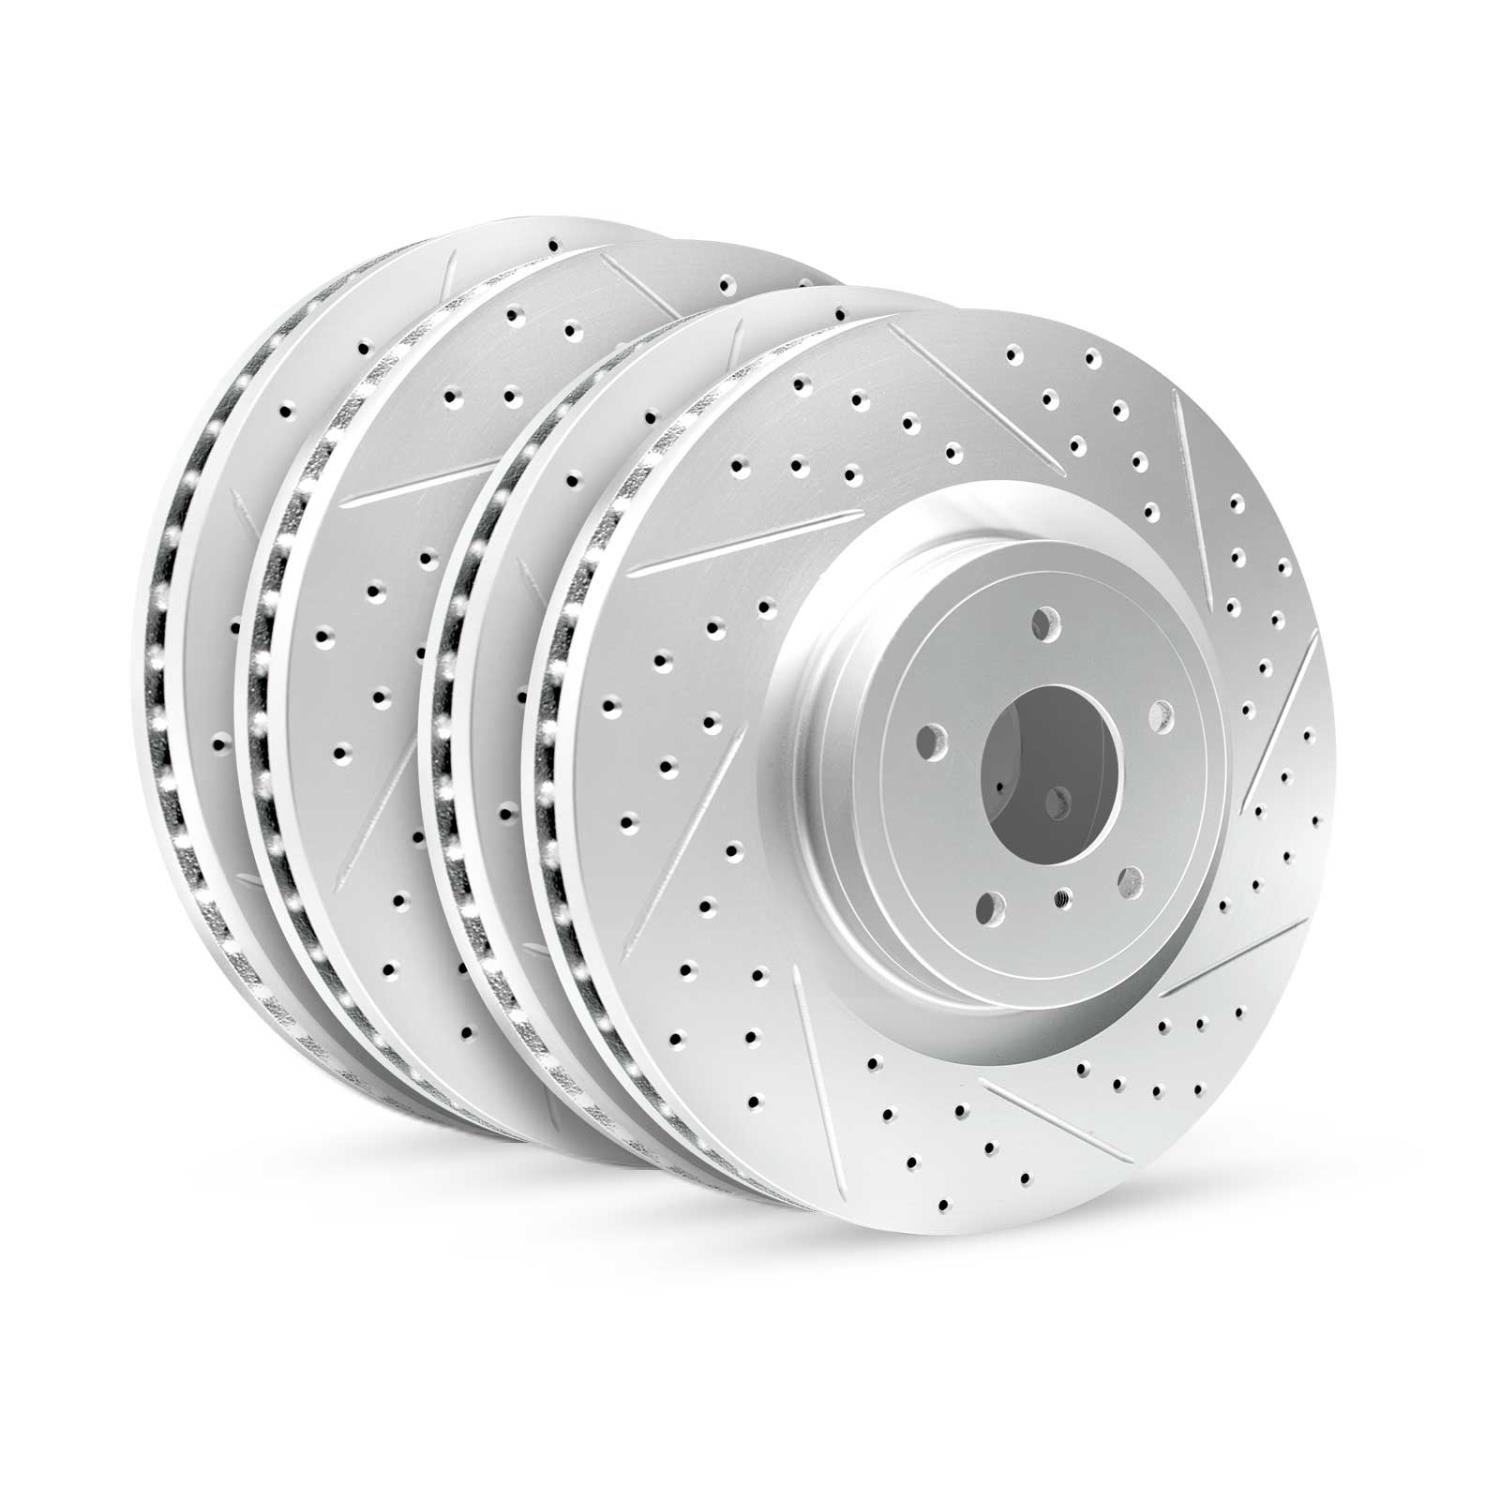 GEO-Carbon Drilled/Slotted Rotors, 2003-2007 Acura/Honda, Position: Front/Rear